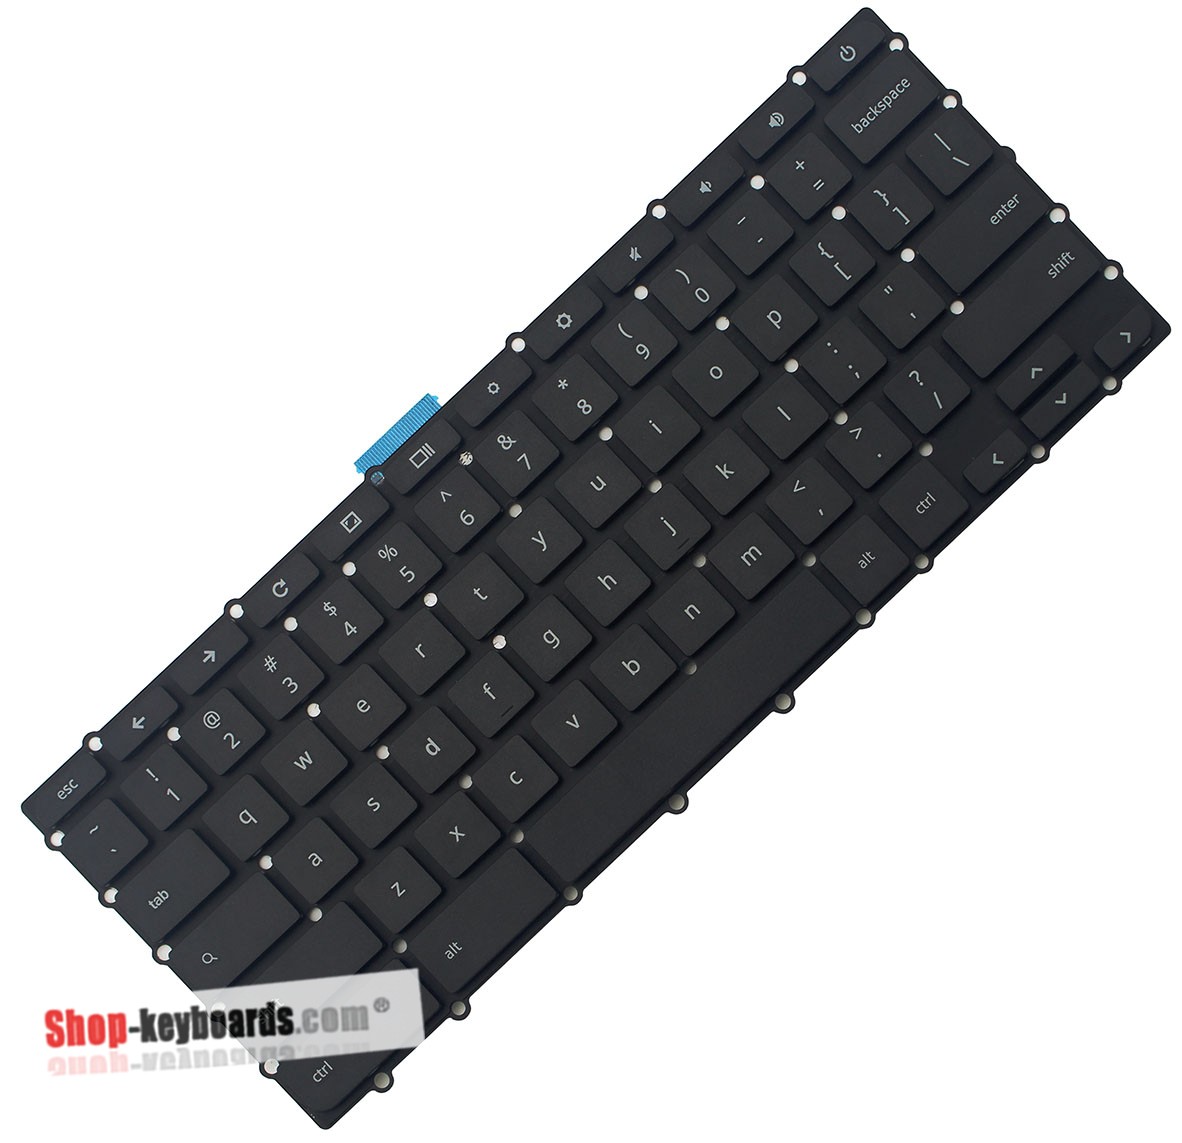 Acer CB3-131-C76R  Keyboard replacement